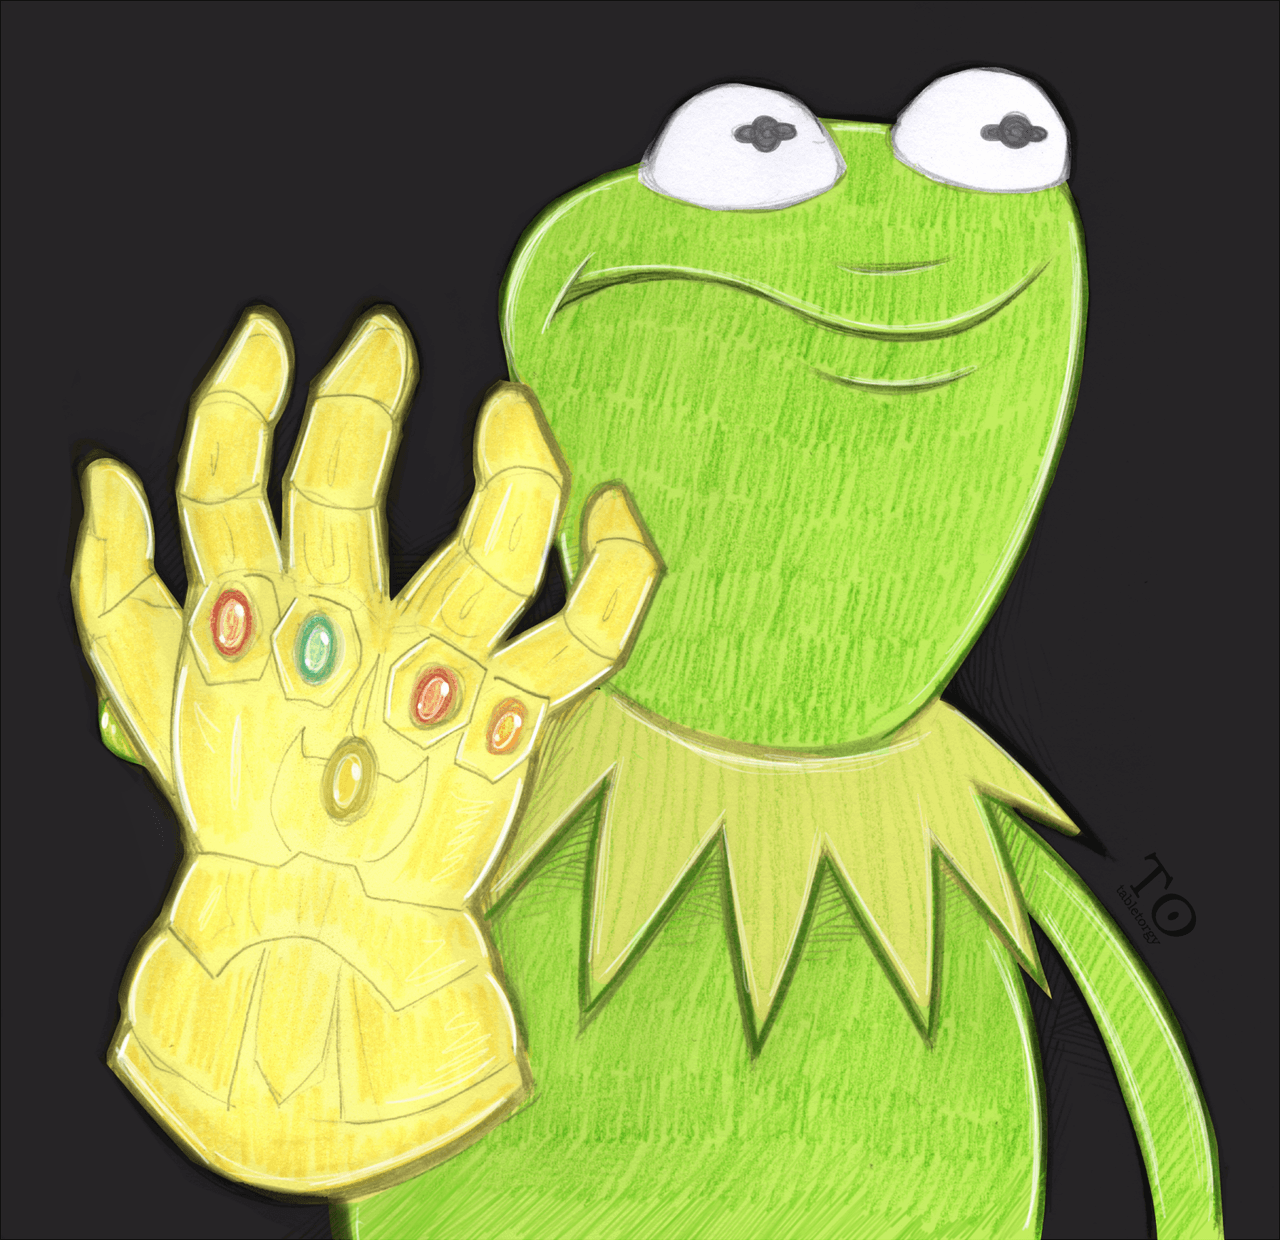 Kermit with the Infinity Gauntlet. Kermit the Frog. Know